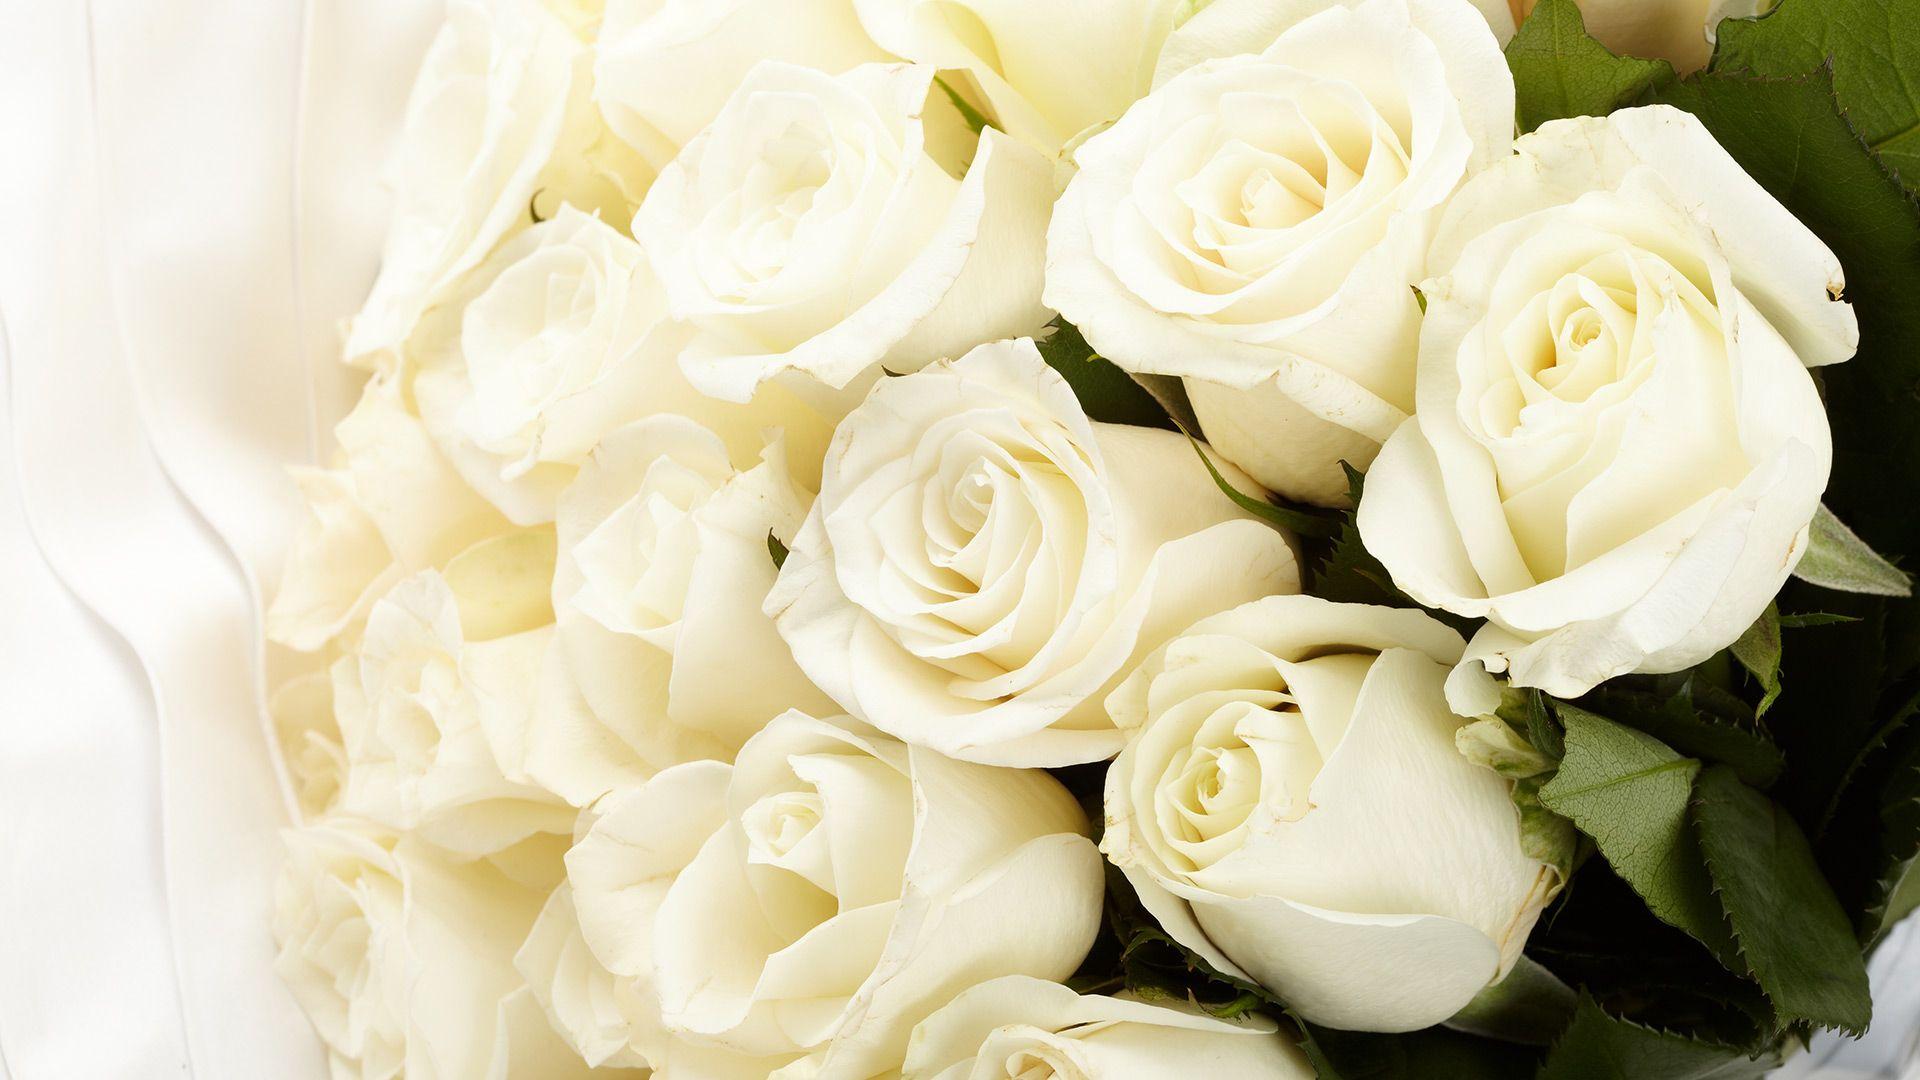 Funeral Flowers Wallpapers - Top Free Funeral Flowers Backgrounds ...